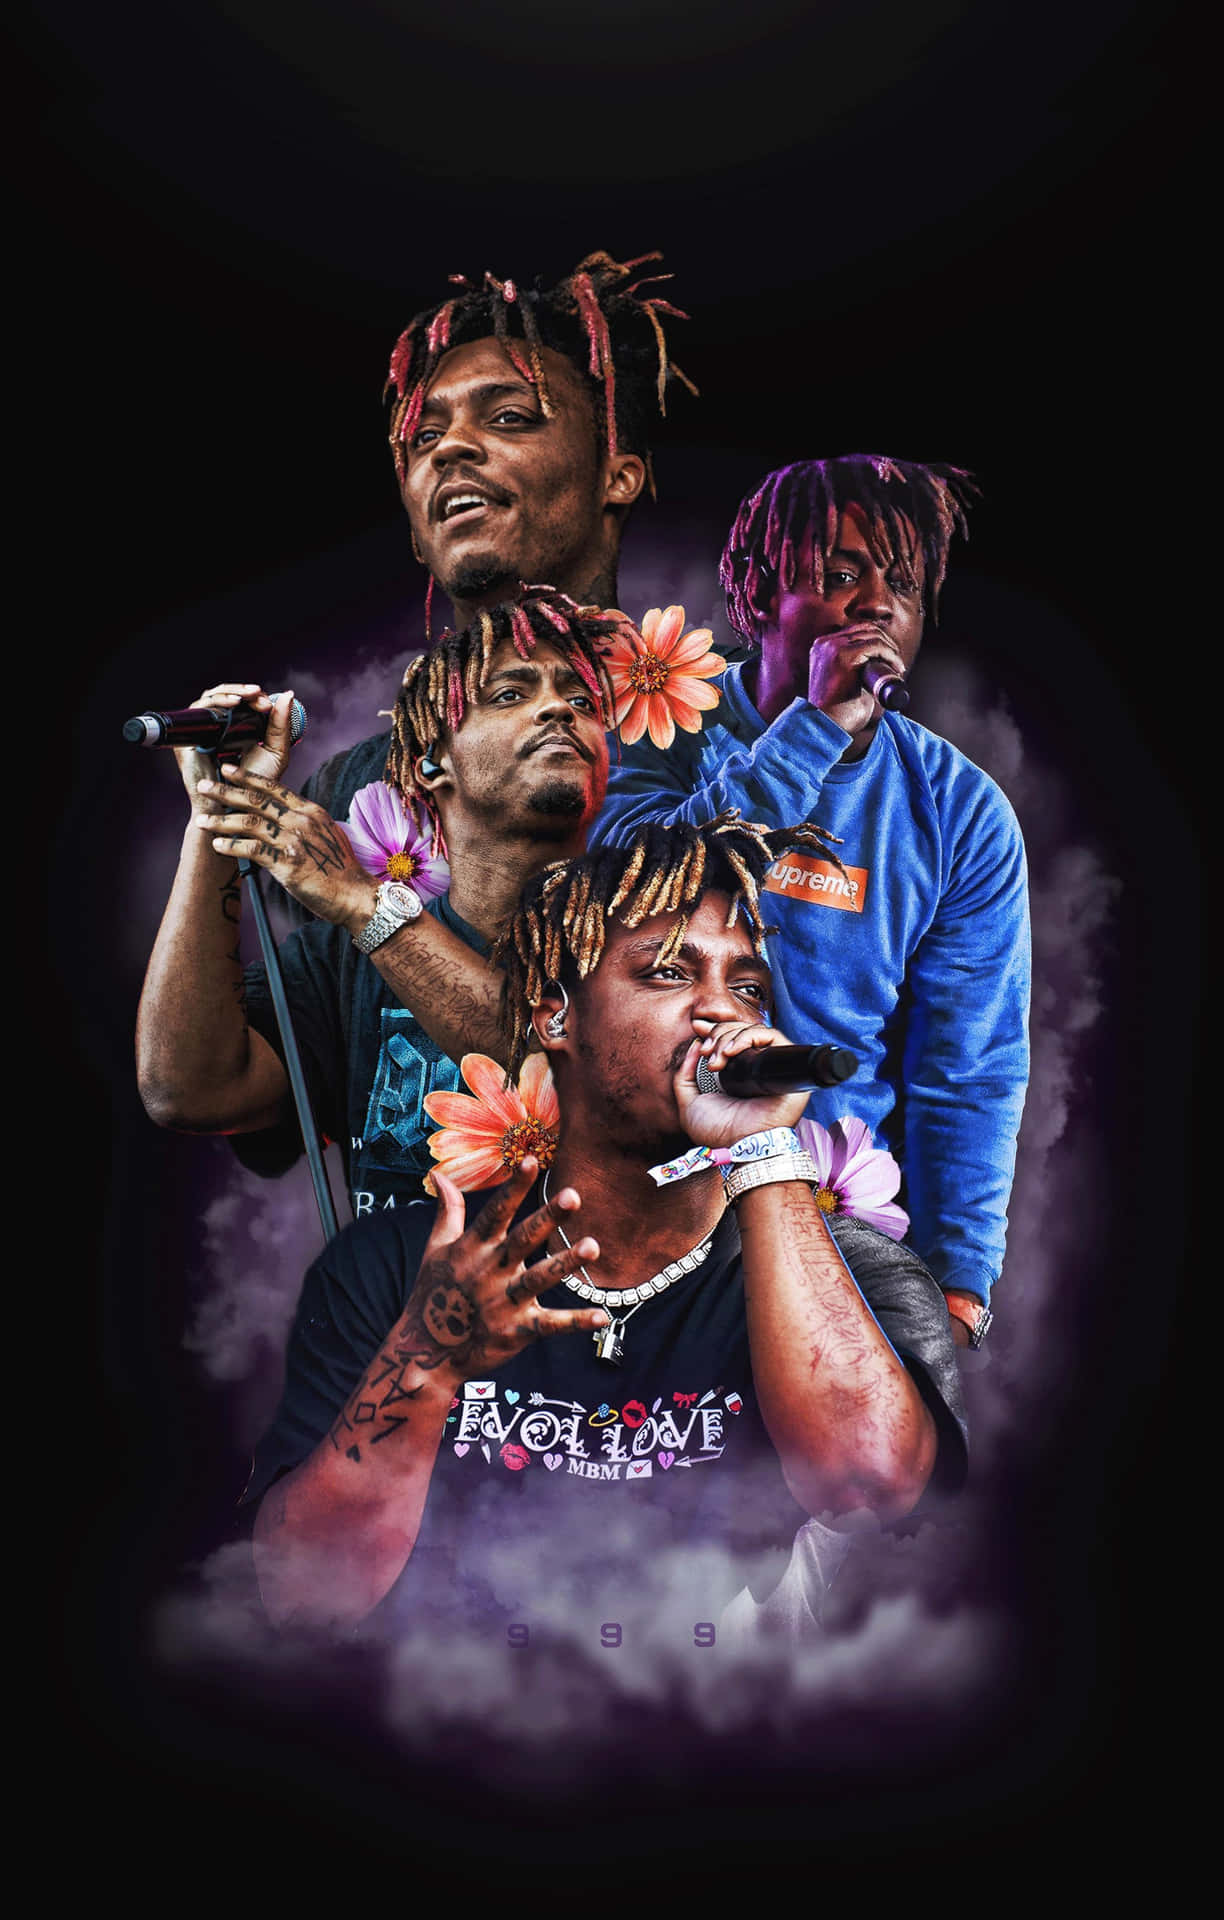 A tribute to the late Juice Wrld, the master of emo rap